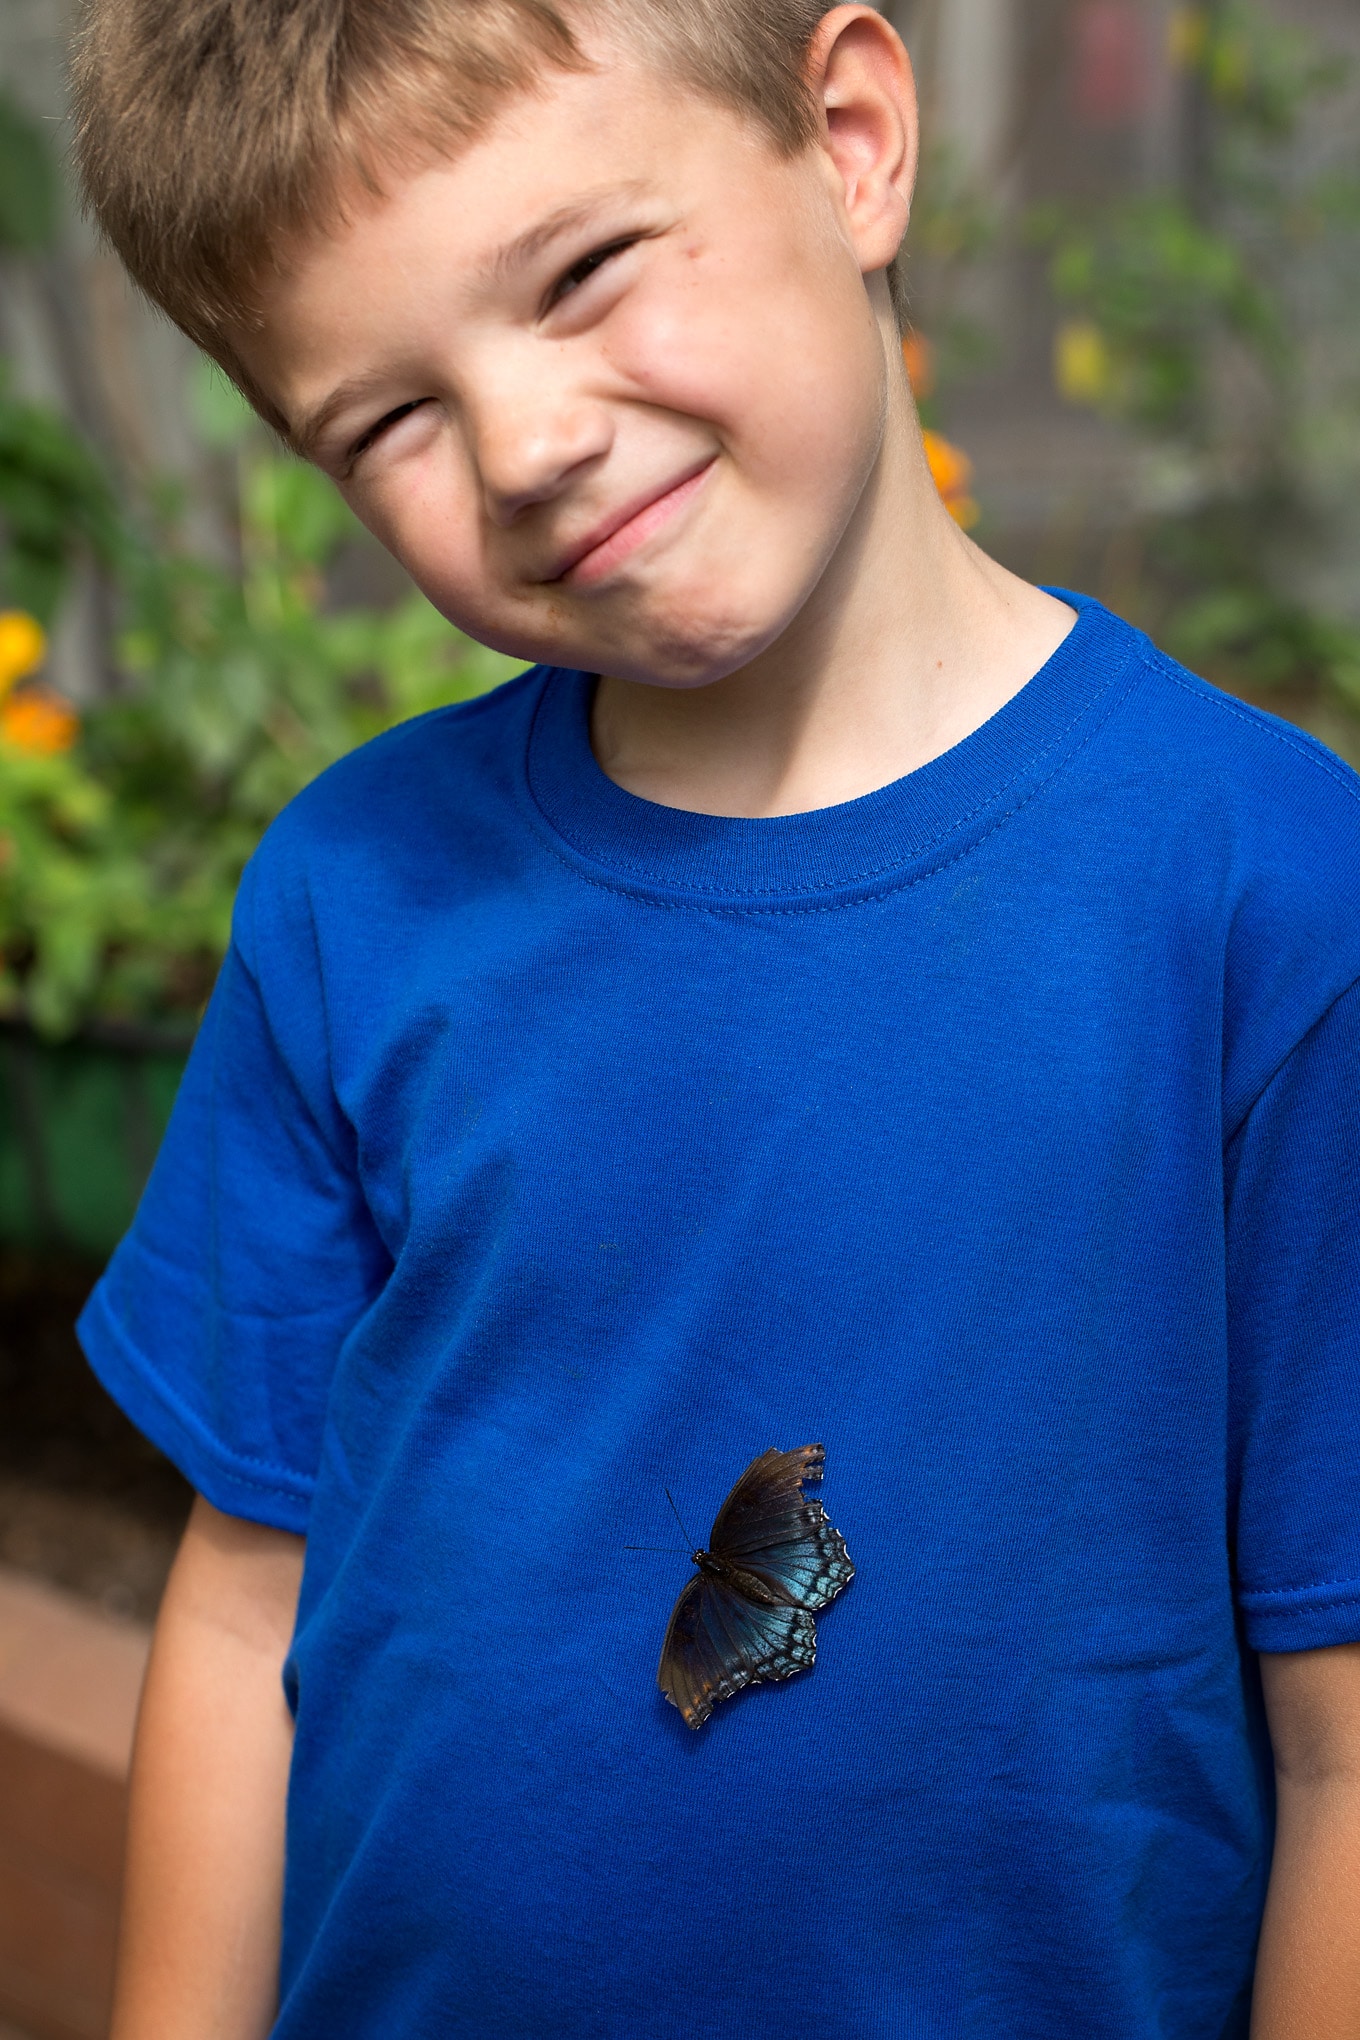 Child With Butterfly On His Shirt